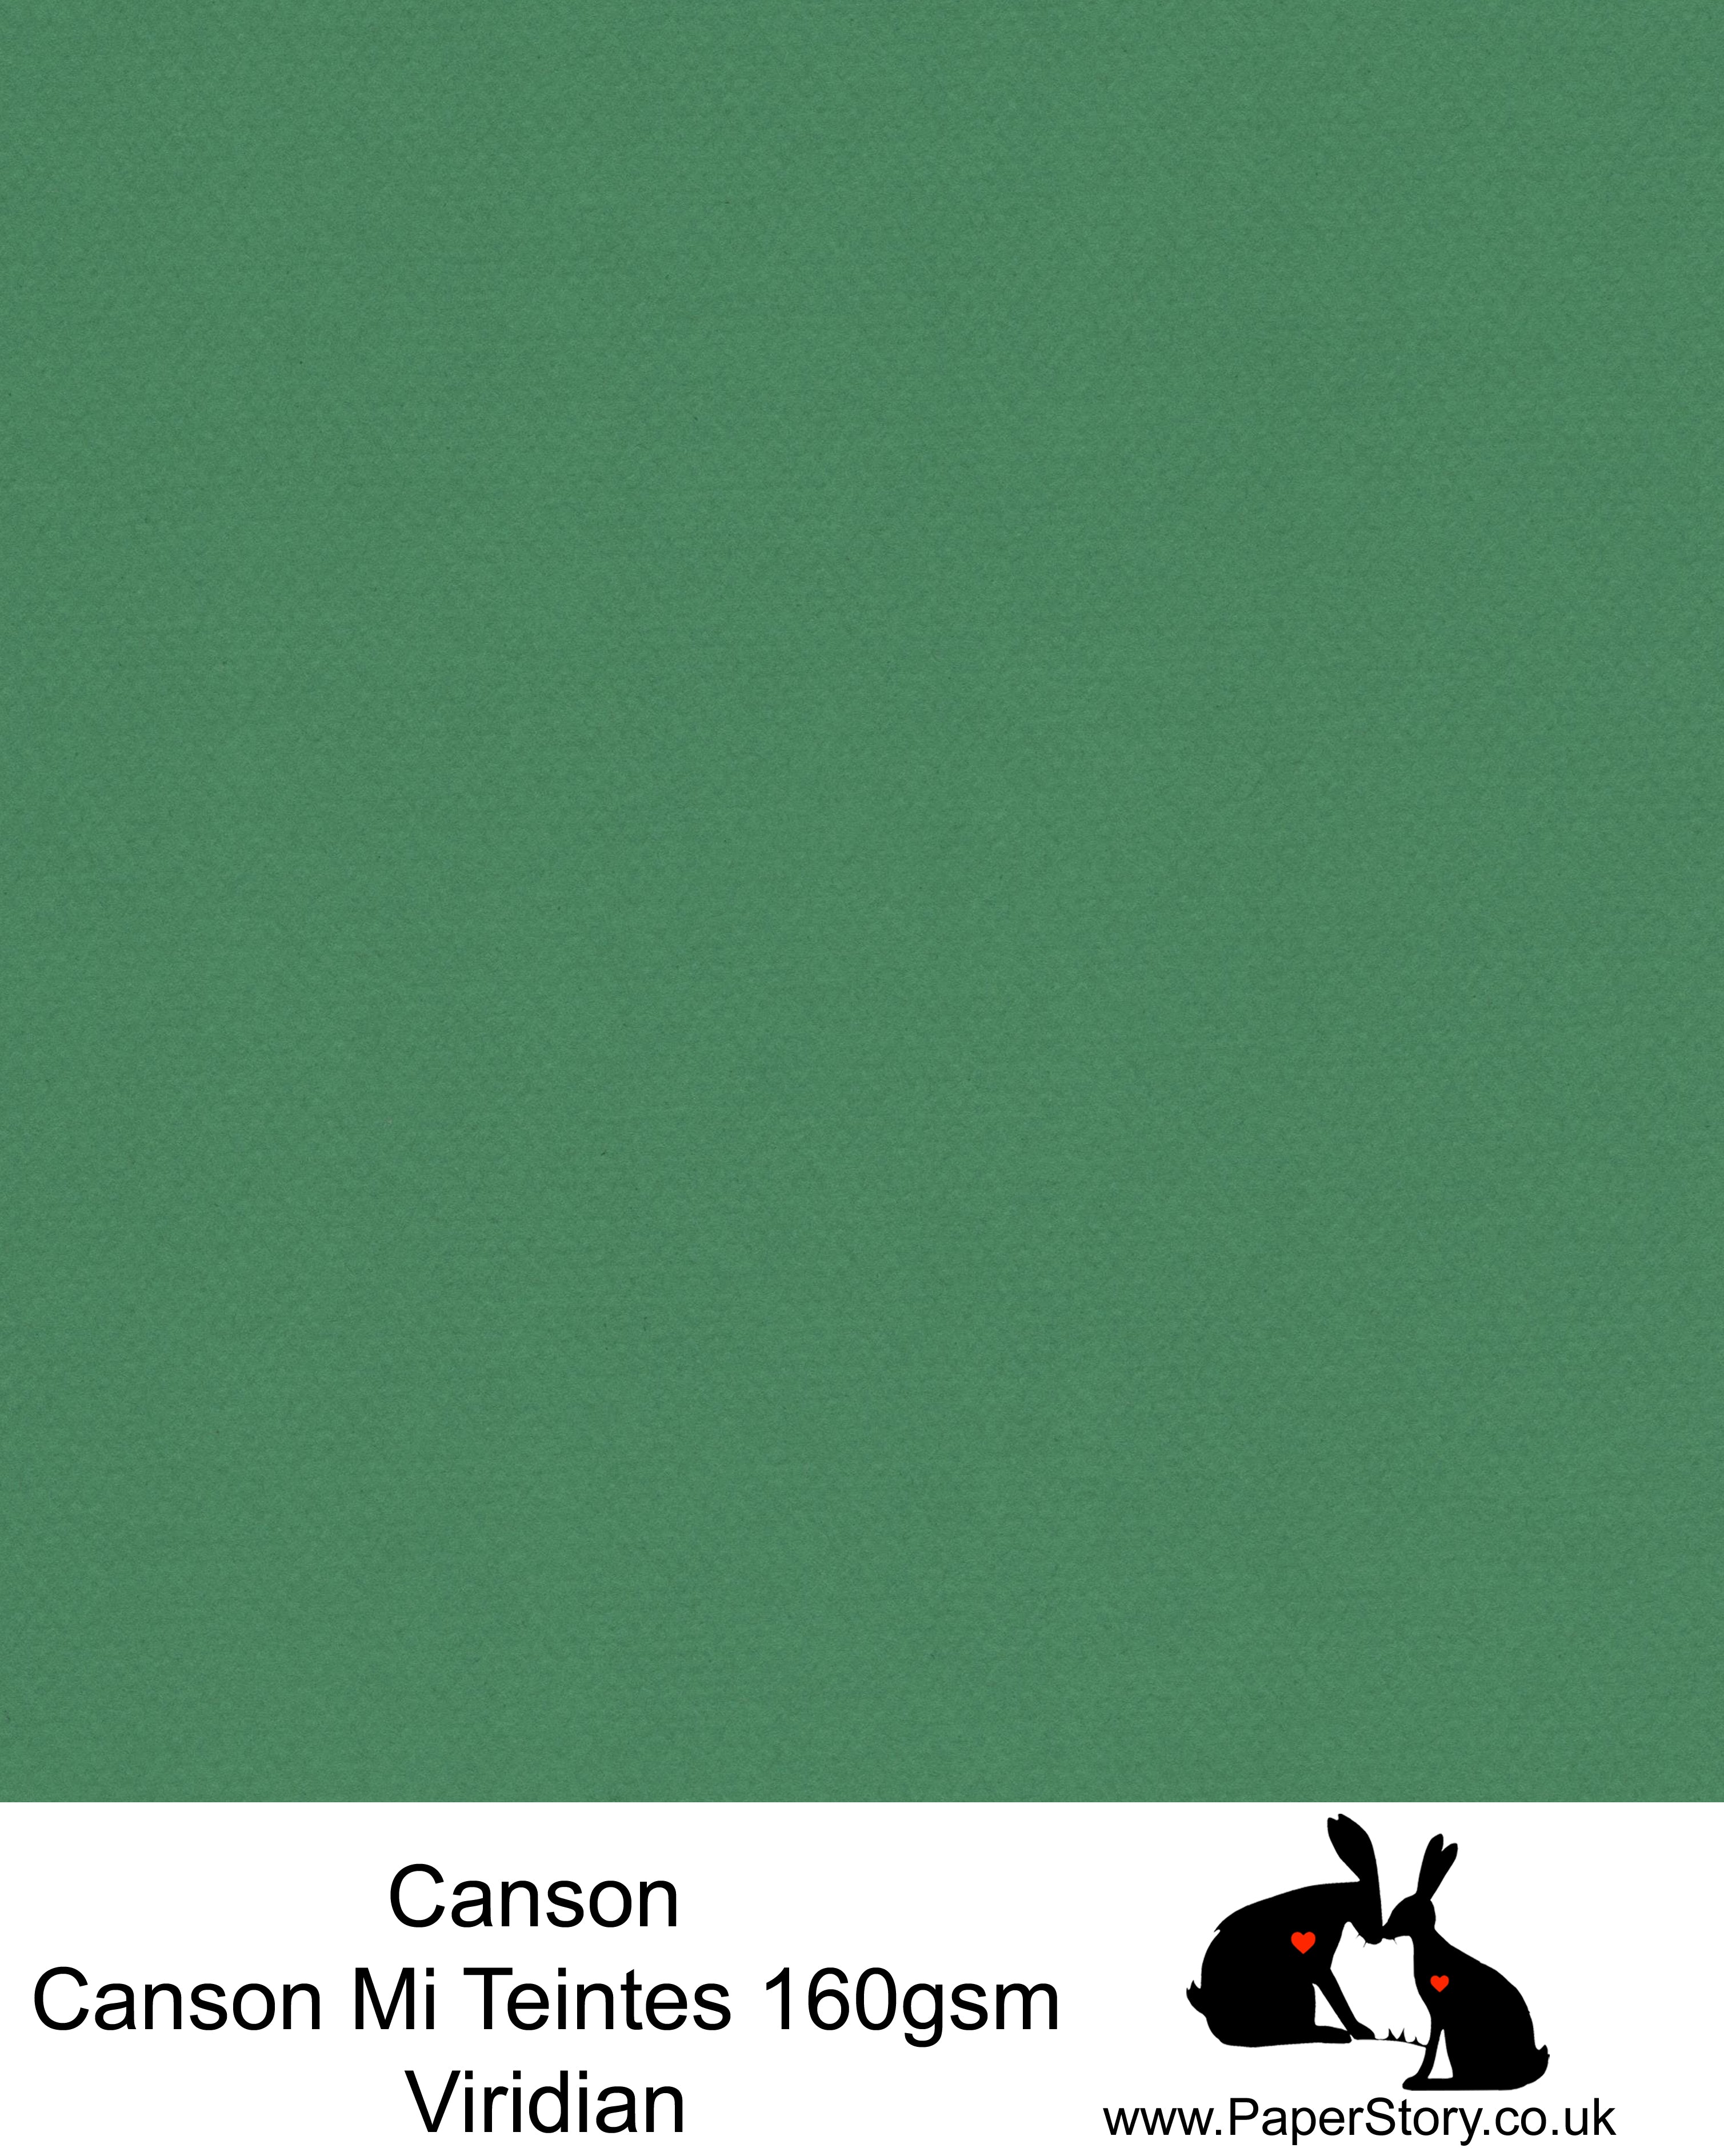 Canson Mi Teintes acid free, Viridian Green, hammered texture honeycomb surface paper 160 gsm. This is a popular and classic paper for all artists especially well respected for Pastel  and Papercutting made famous by Paper Panda. This paper has a honeycombed finish one side and fine grain the other. An authentic art paper, acid free with a  very high 50% cotton content. Canson Mi-Teintes complies with the ISO 9706 standard on permanence, a guarantee of excellent conservation  